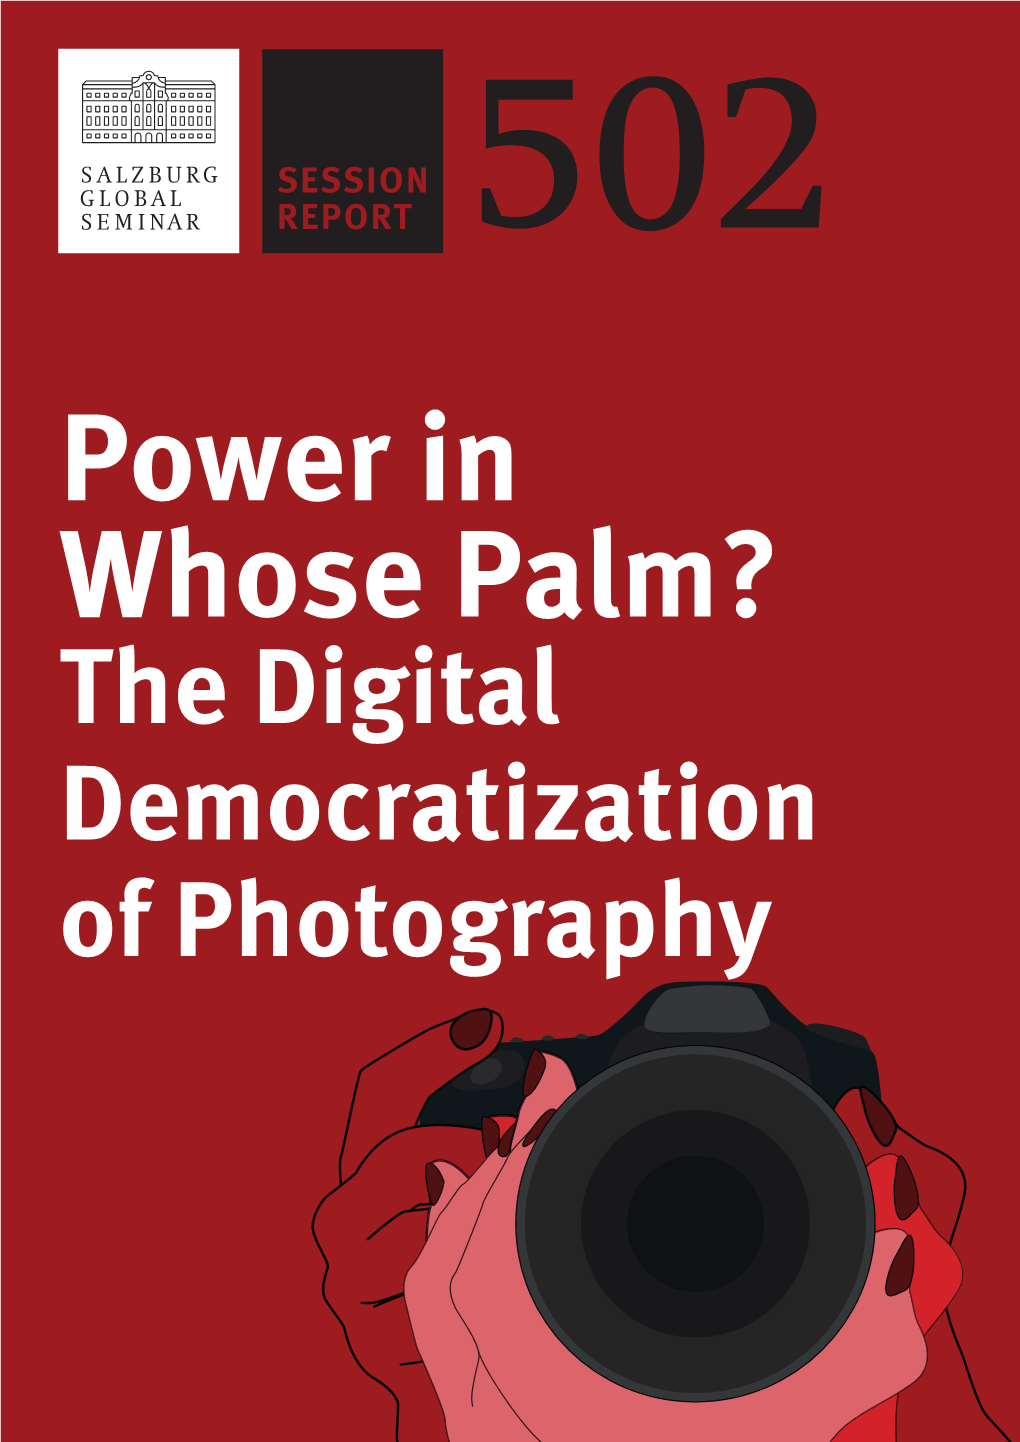 The Digital Democratization of Photography Power in Whose Palm: the Digital Democratiozation of Photography Session Report 502